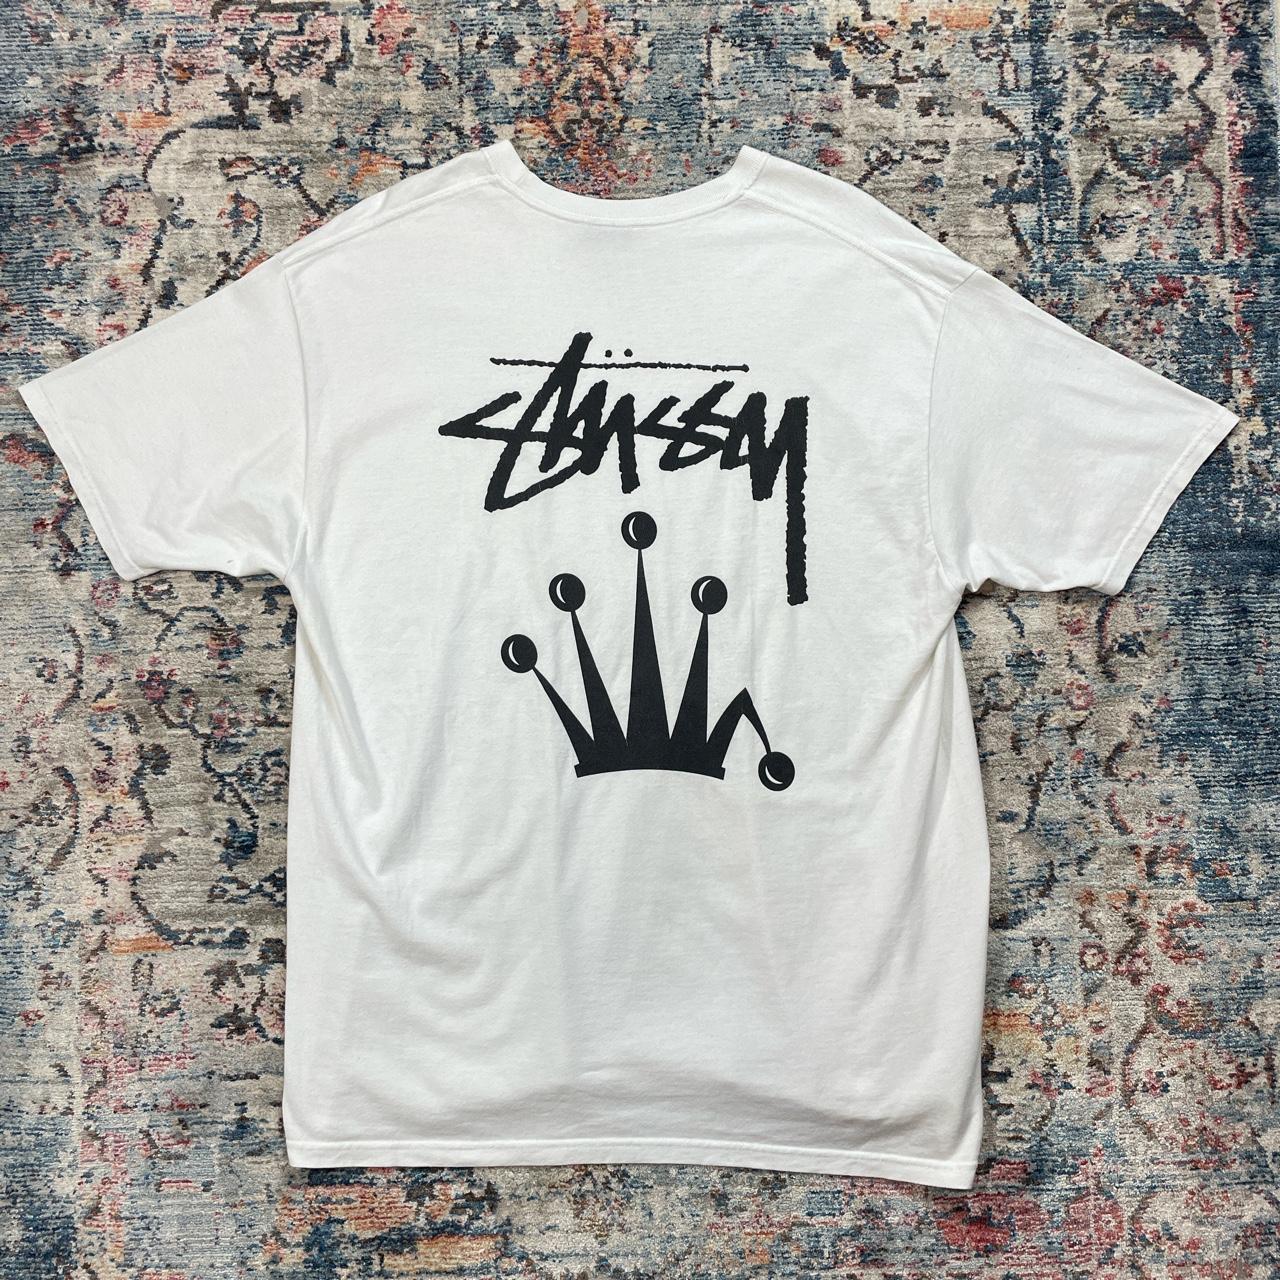 Stussy White Crown Spellout T-Shirt